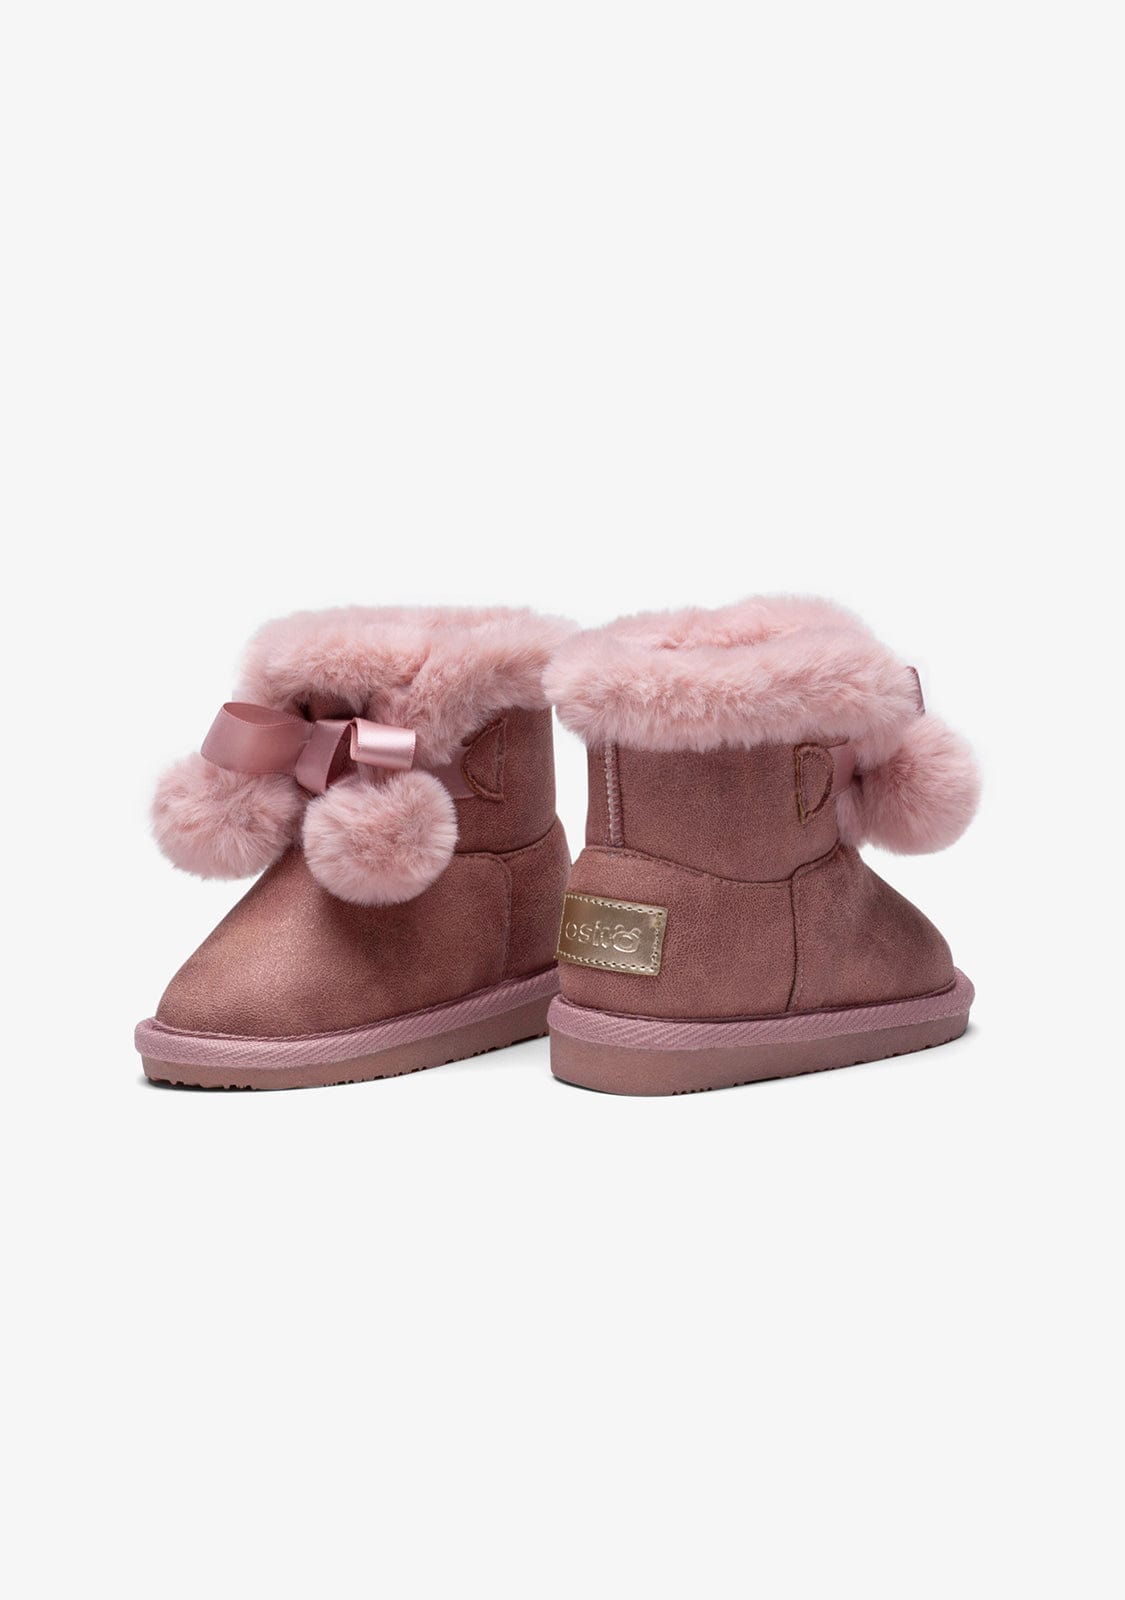 OSITO Shoes Baby's Pink Pompom Australian Boots